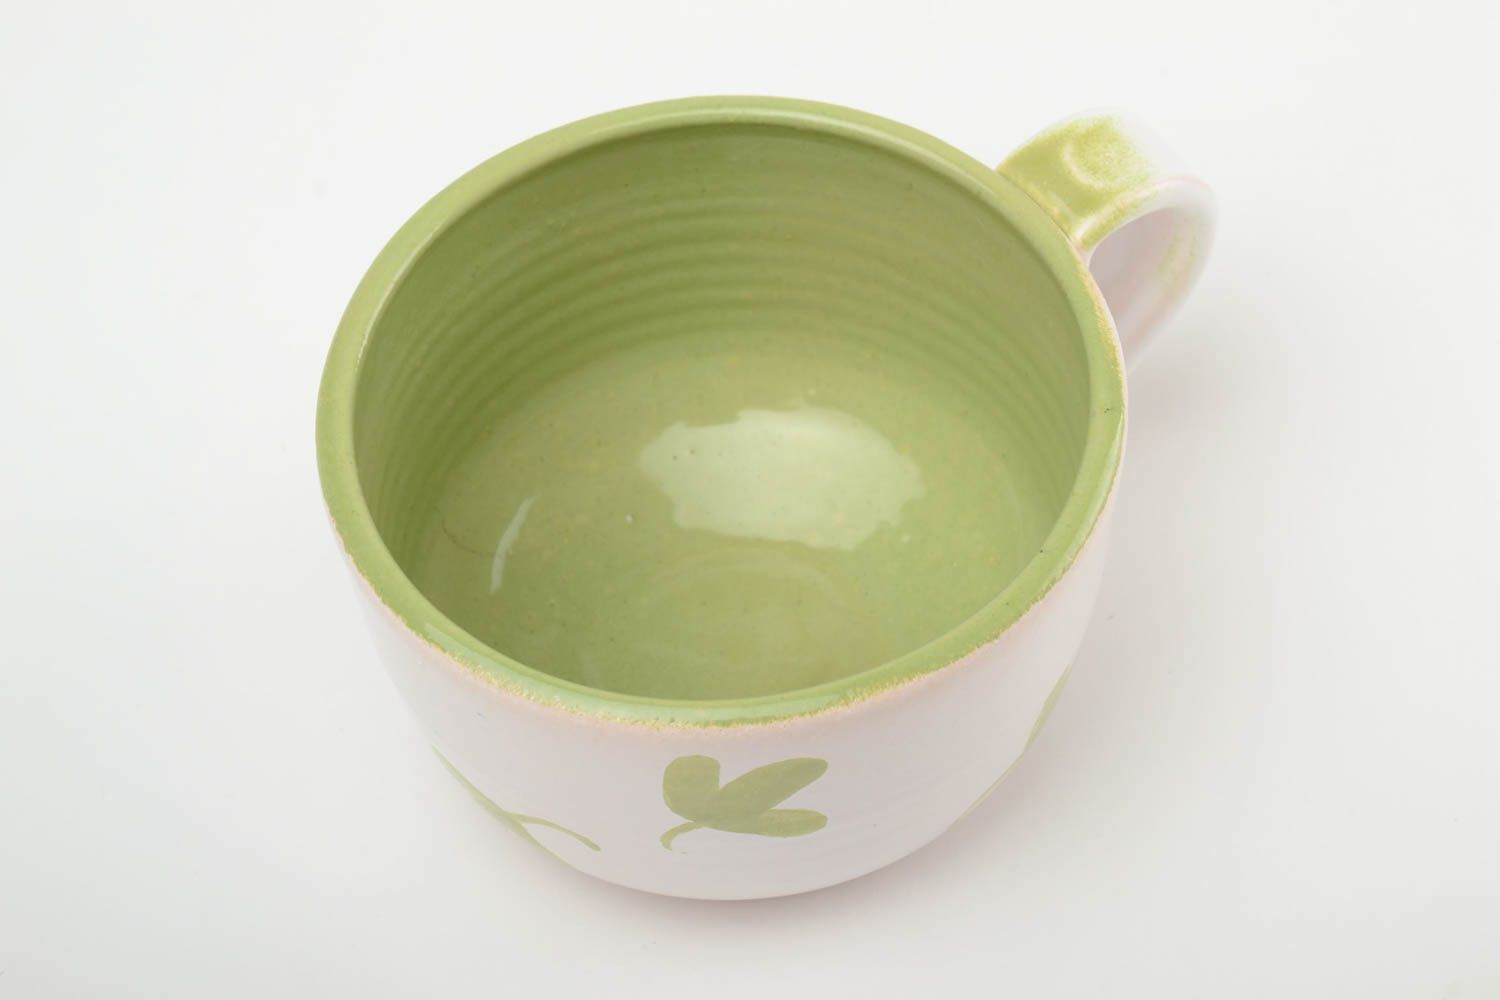 11 oz lime glazed ceramic teacup with handle and heart pattern photo 2